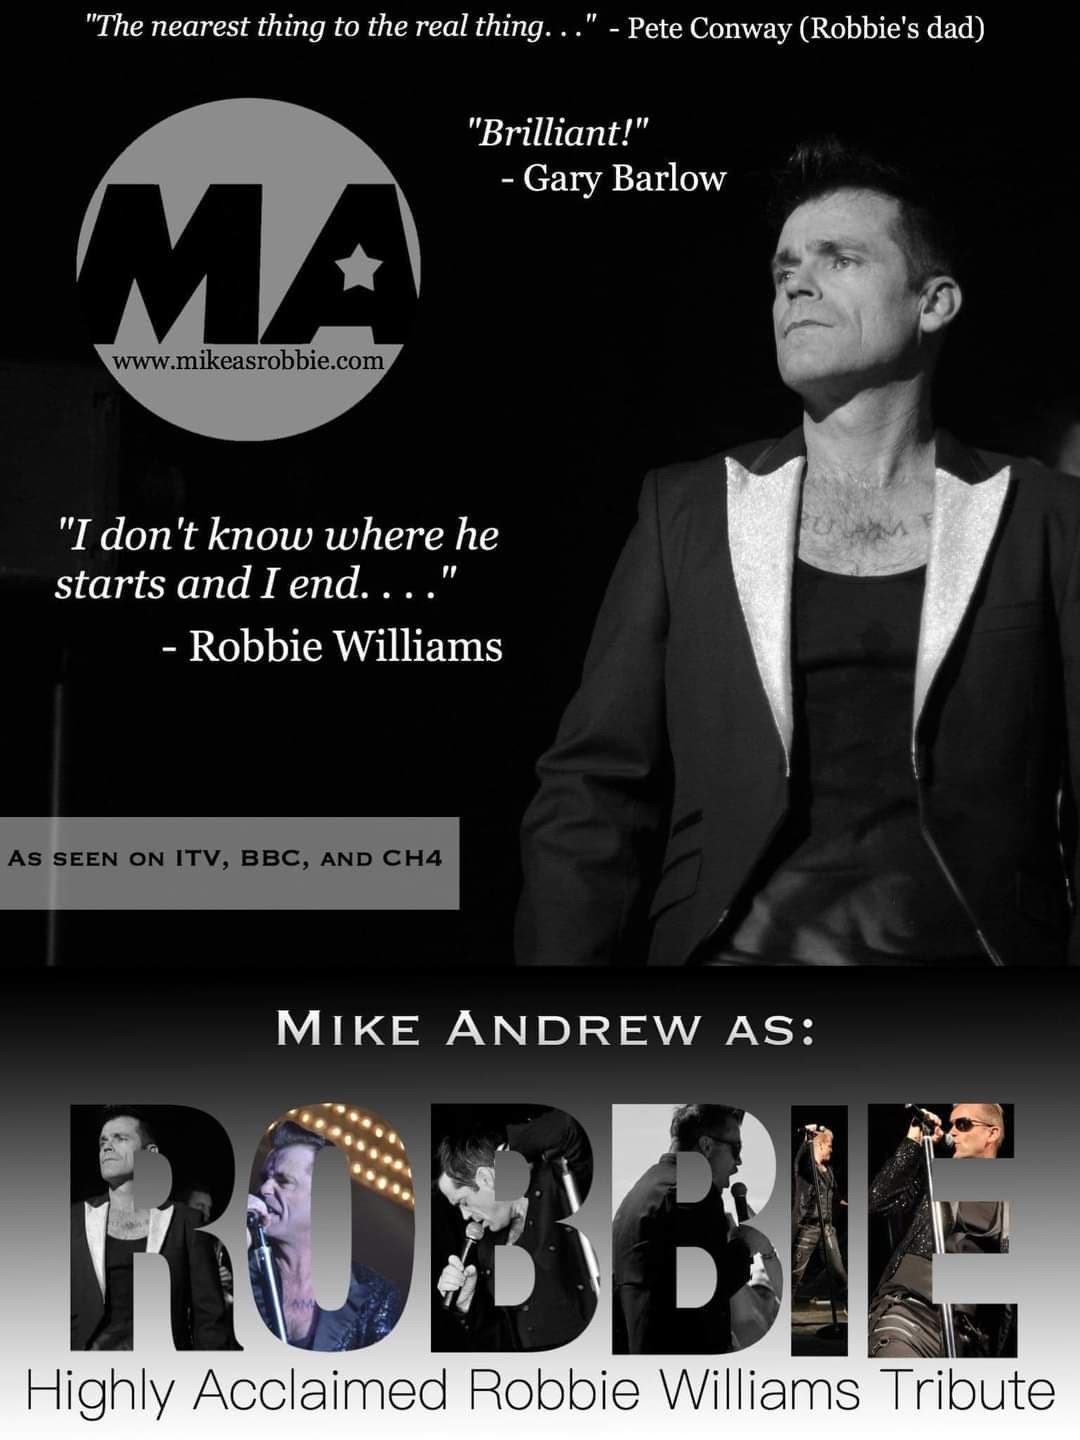 ROBBIE WILLIAMS TRIBUTE NIGHT  on Nov 05, 19:30@Falcon hotel - Buy tickets and Get information on whittlesey music nights 